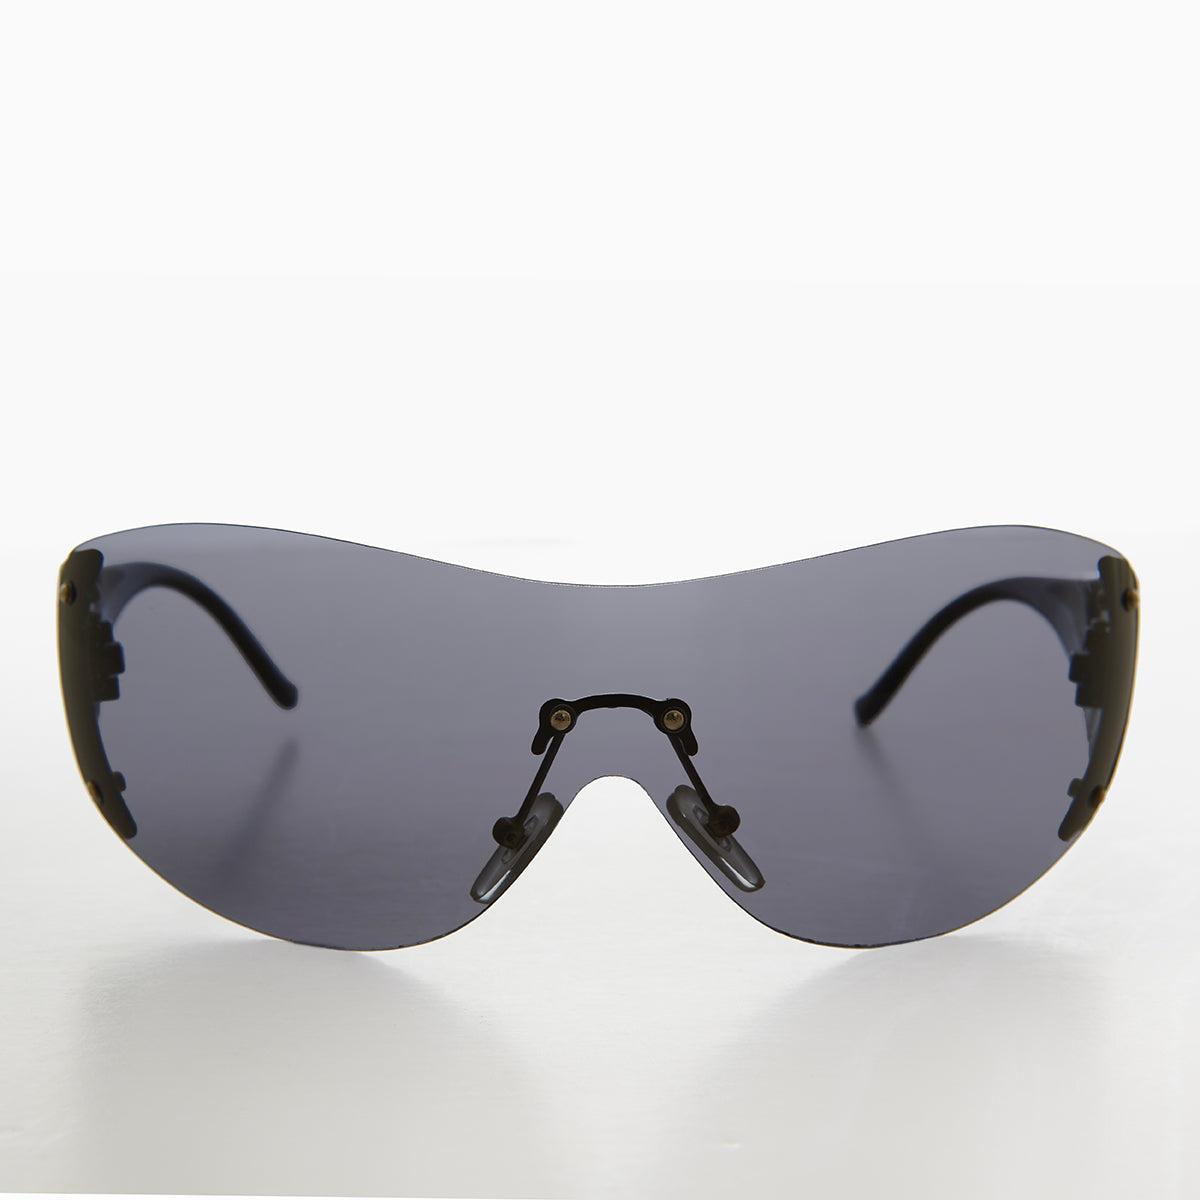 Oversized Round Insect Vintage Sunglasses